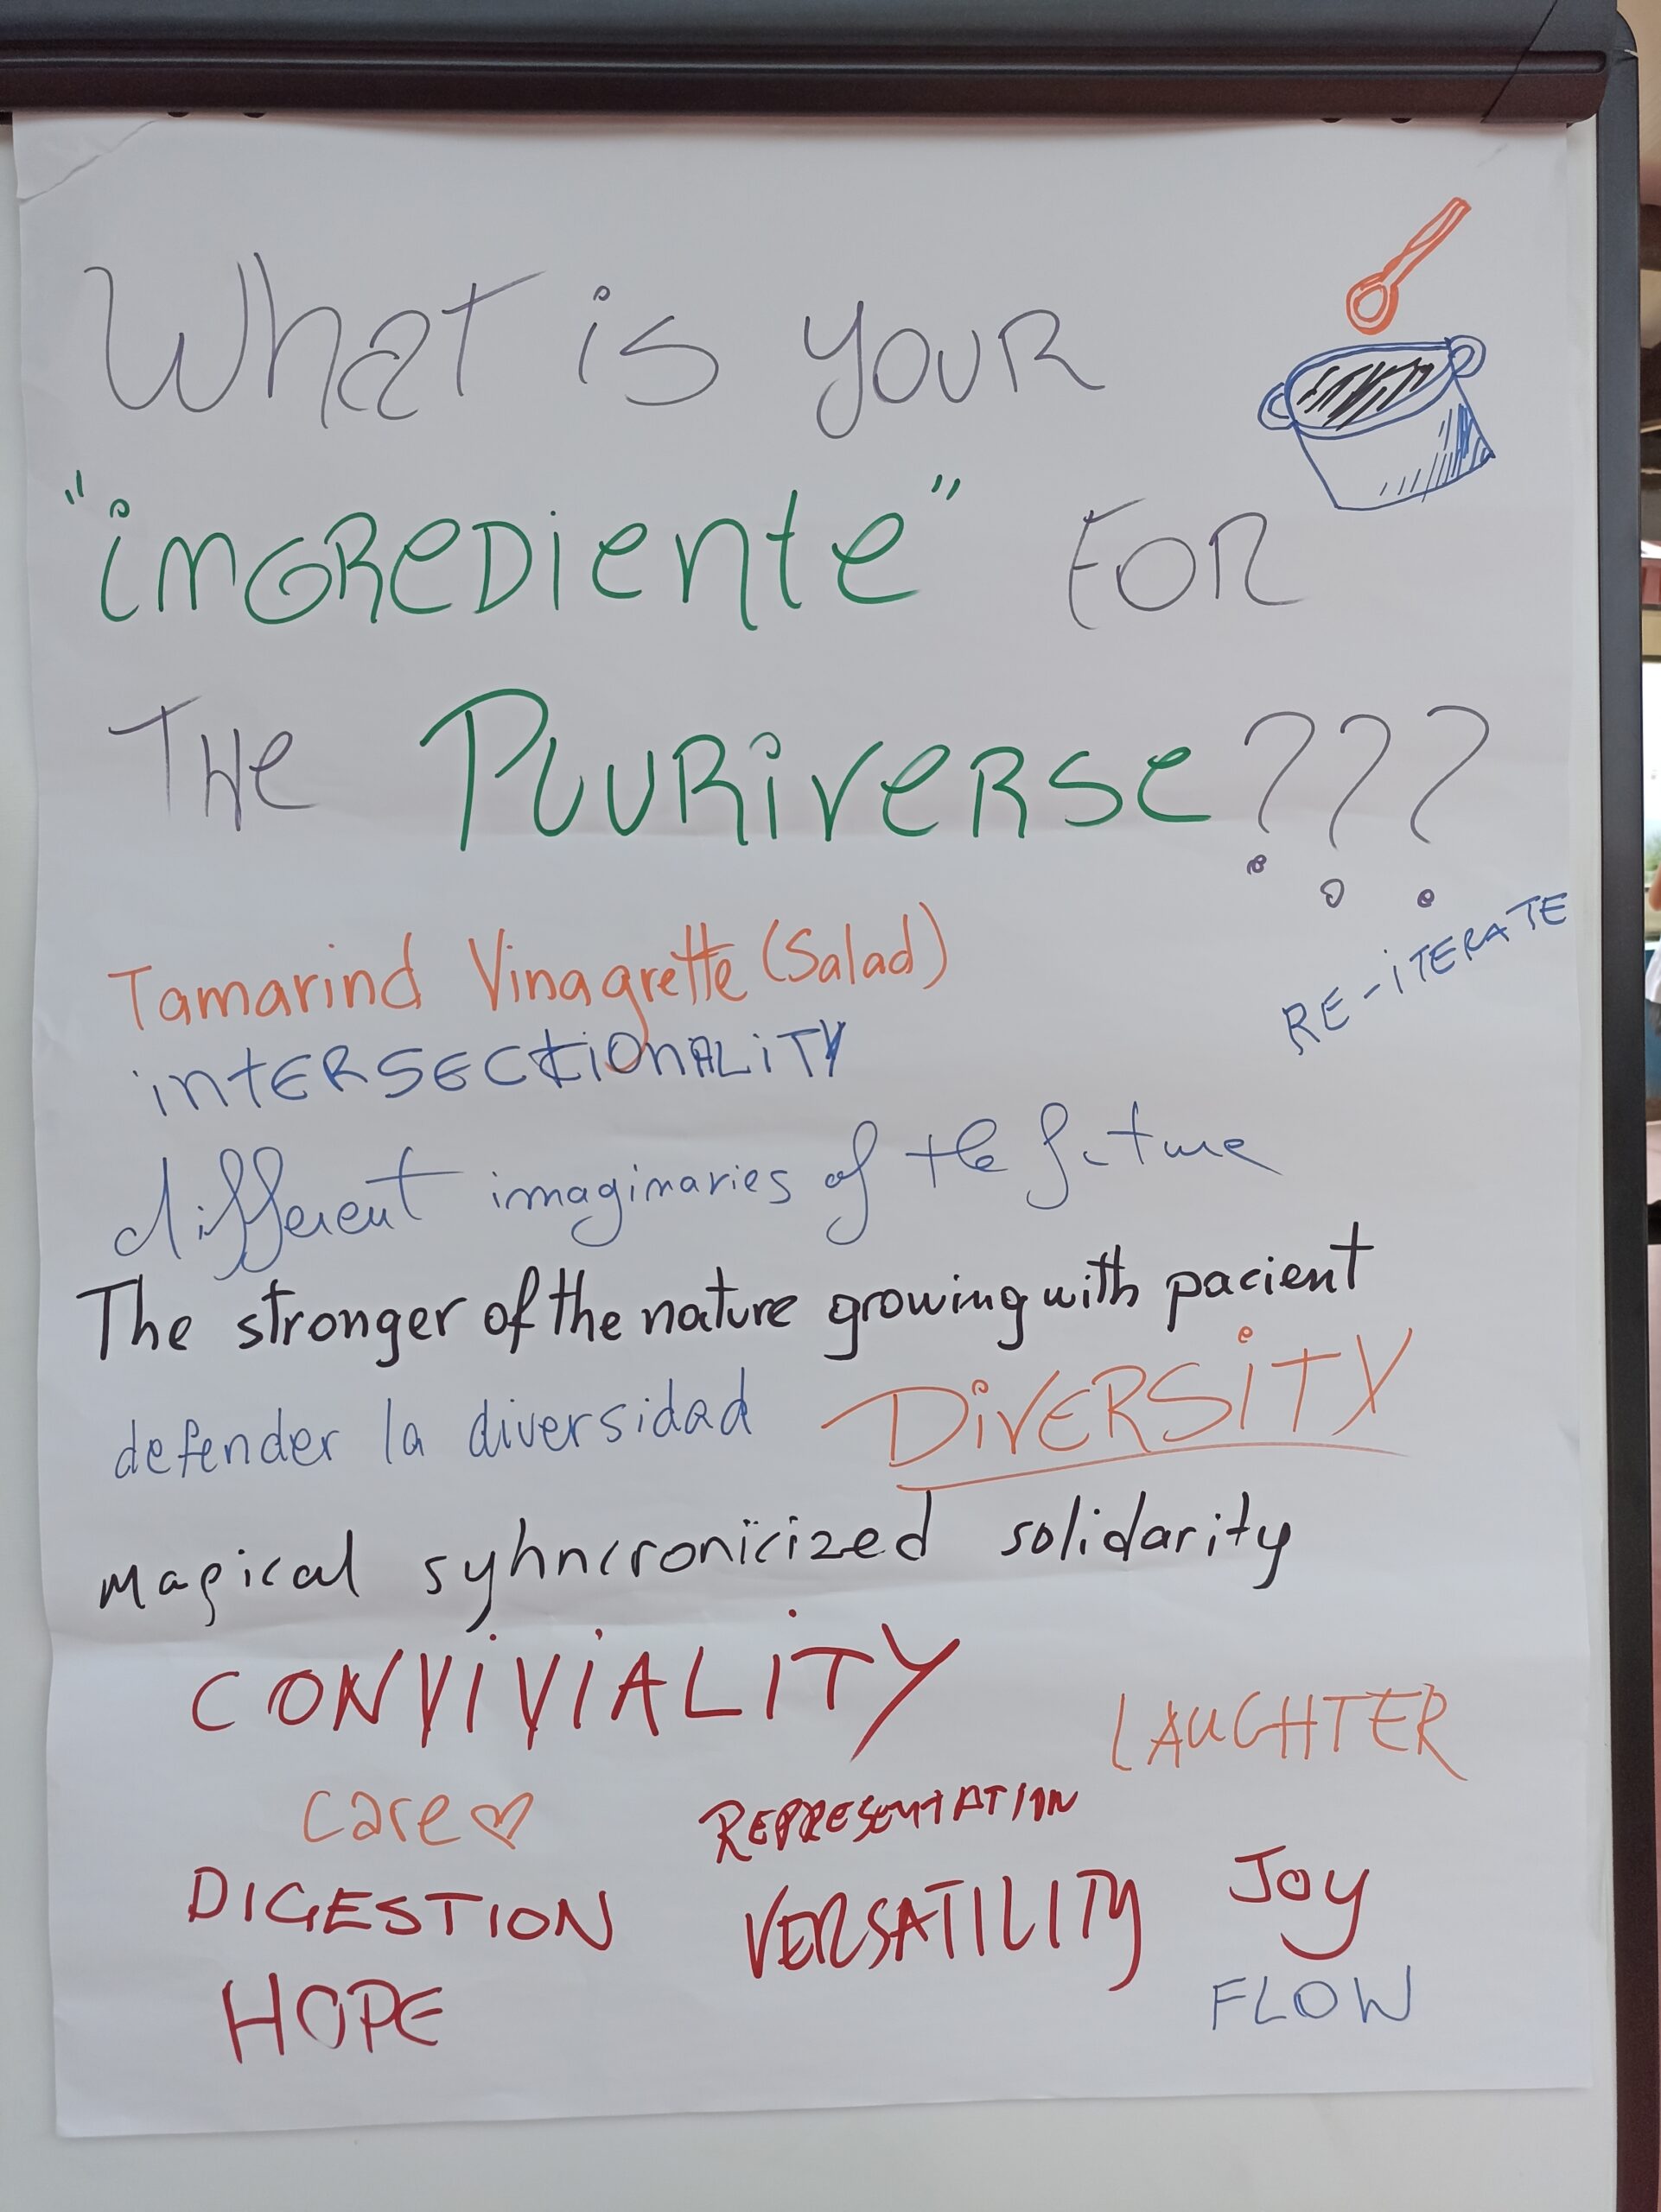 Image shows a piece of flip chart paper with the title 'What is your ingredient' for the Pluriverse?' written in black and green pen. Underneath the heading, the following words are written in response: 'Tamarind Vinagrette (salad); intersectionality; different imaginaries of the future; the stronger of the nature growing with patience; defender la diversidad; diversity; magical synchronised solidarity; conviviality; care; representation; versatility; digestion; hope; laughter; joy; flow; re-iterate